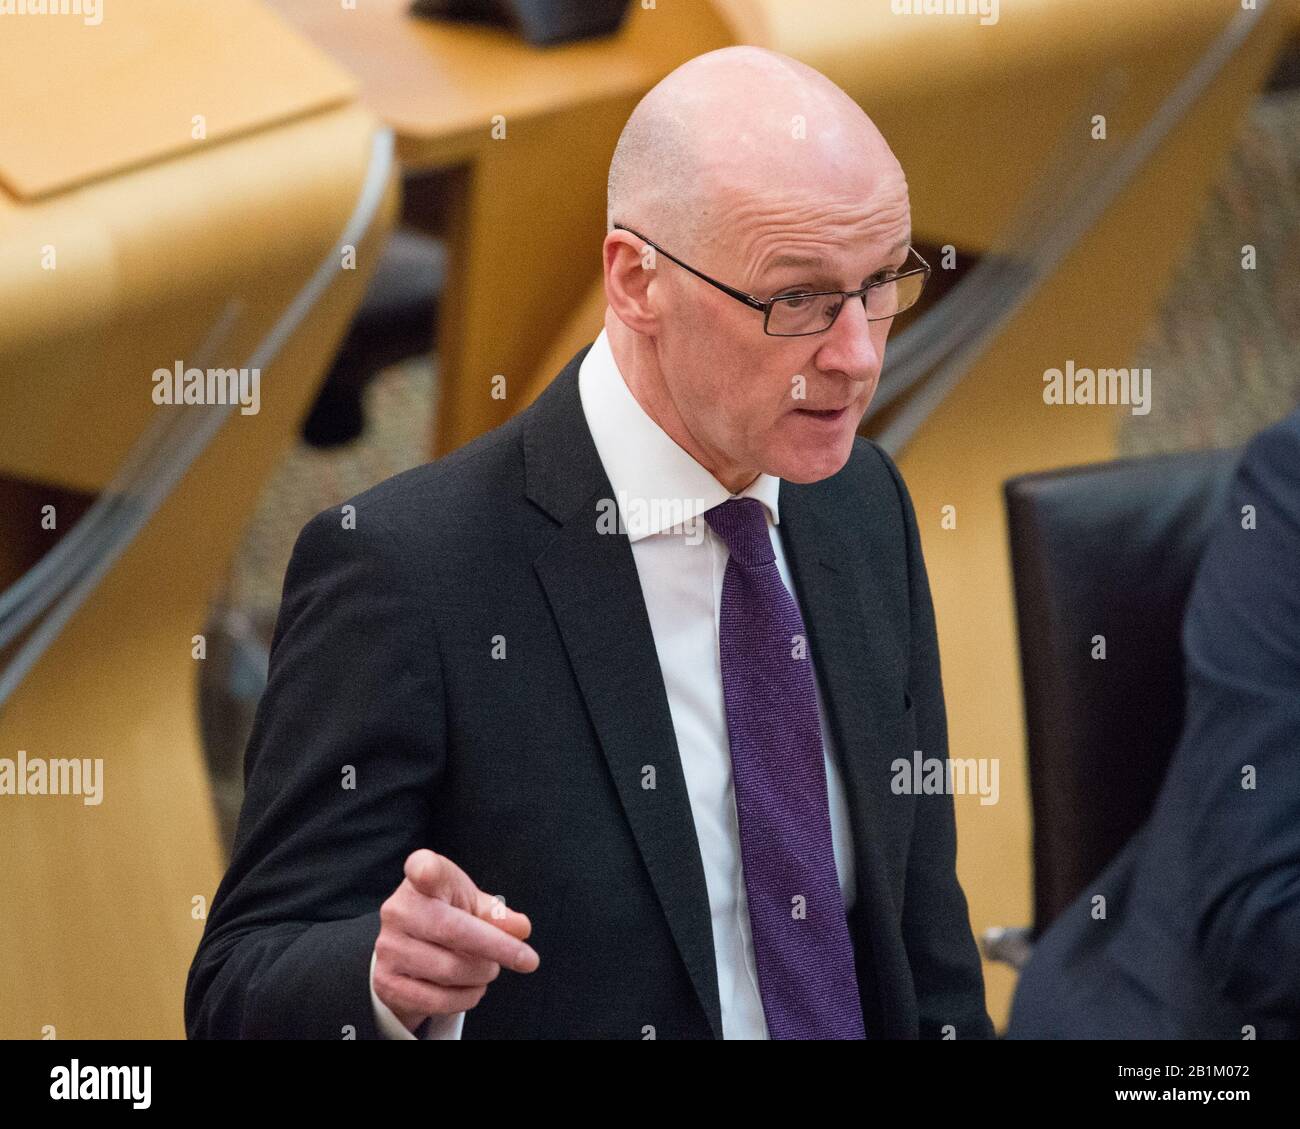 Edinburgh, UK. 26th Feb, 2020. Pictured: John Swinney MSP - Depute First Minister and Cabinet Secretary for Education of the Scottish National Party (SNP). Education and Skills general questions being put to John Swinney who is defending the Scottish Governments record on Education. Credit: Colin Fisher/Alamy Live News Stock Photo